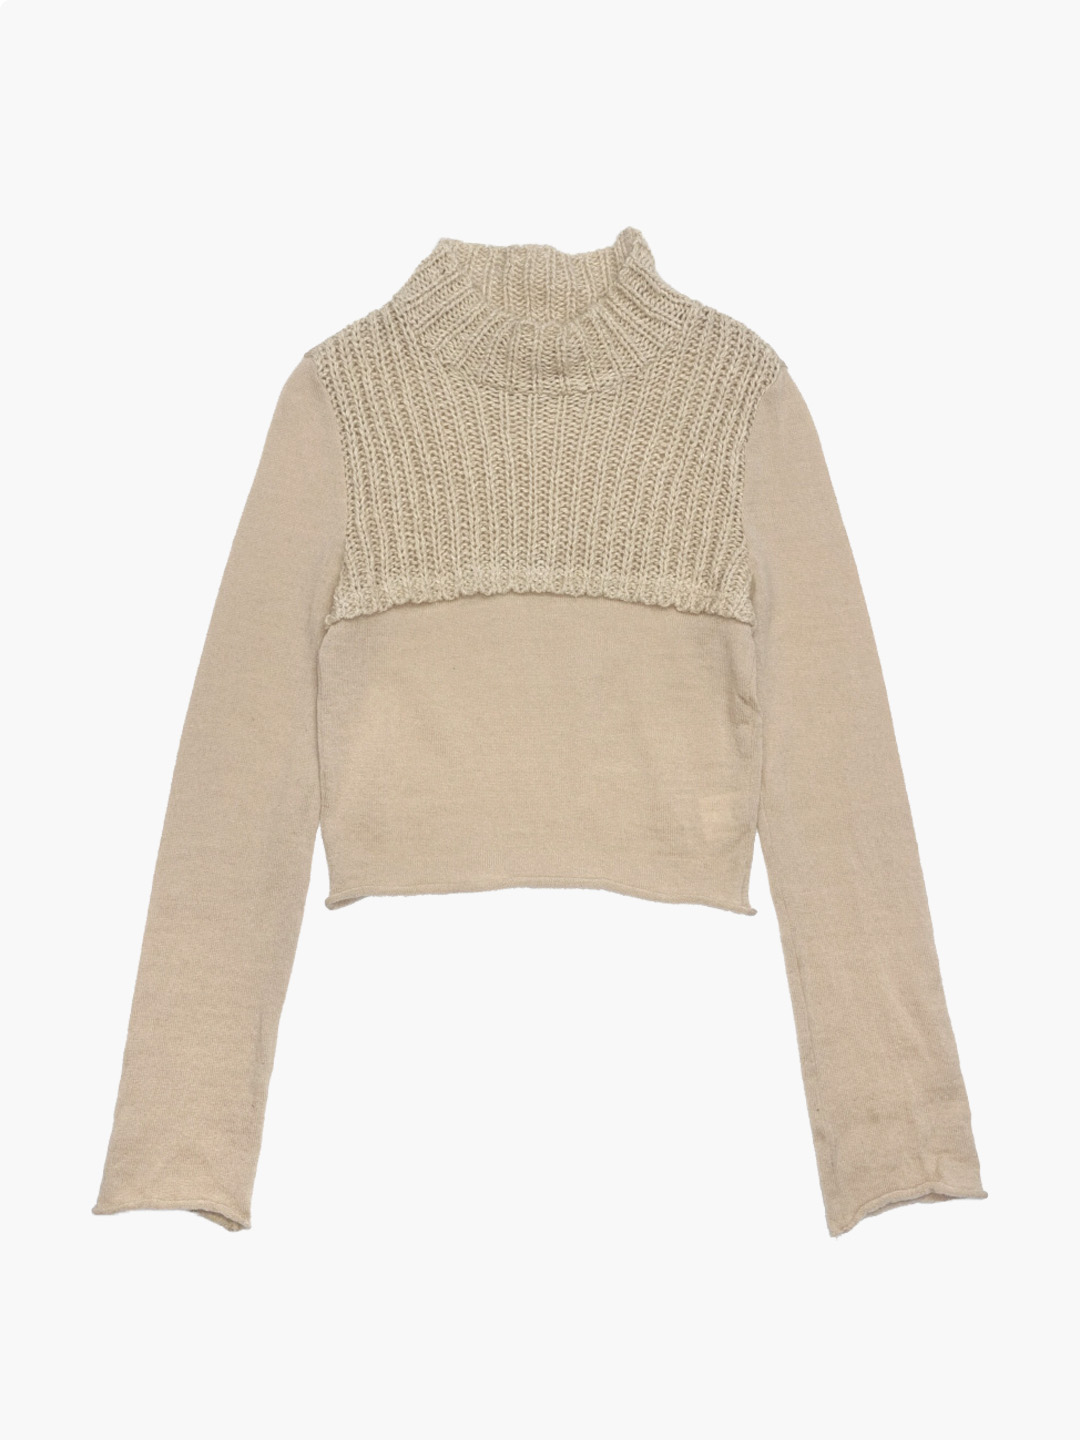 ZUCCALayered knit top